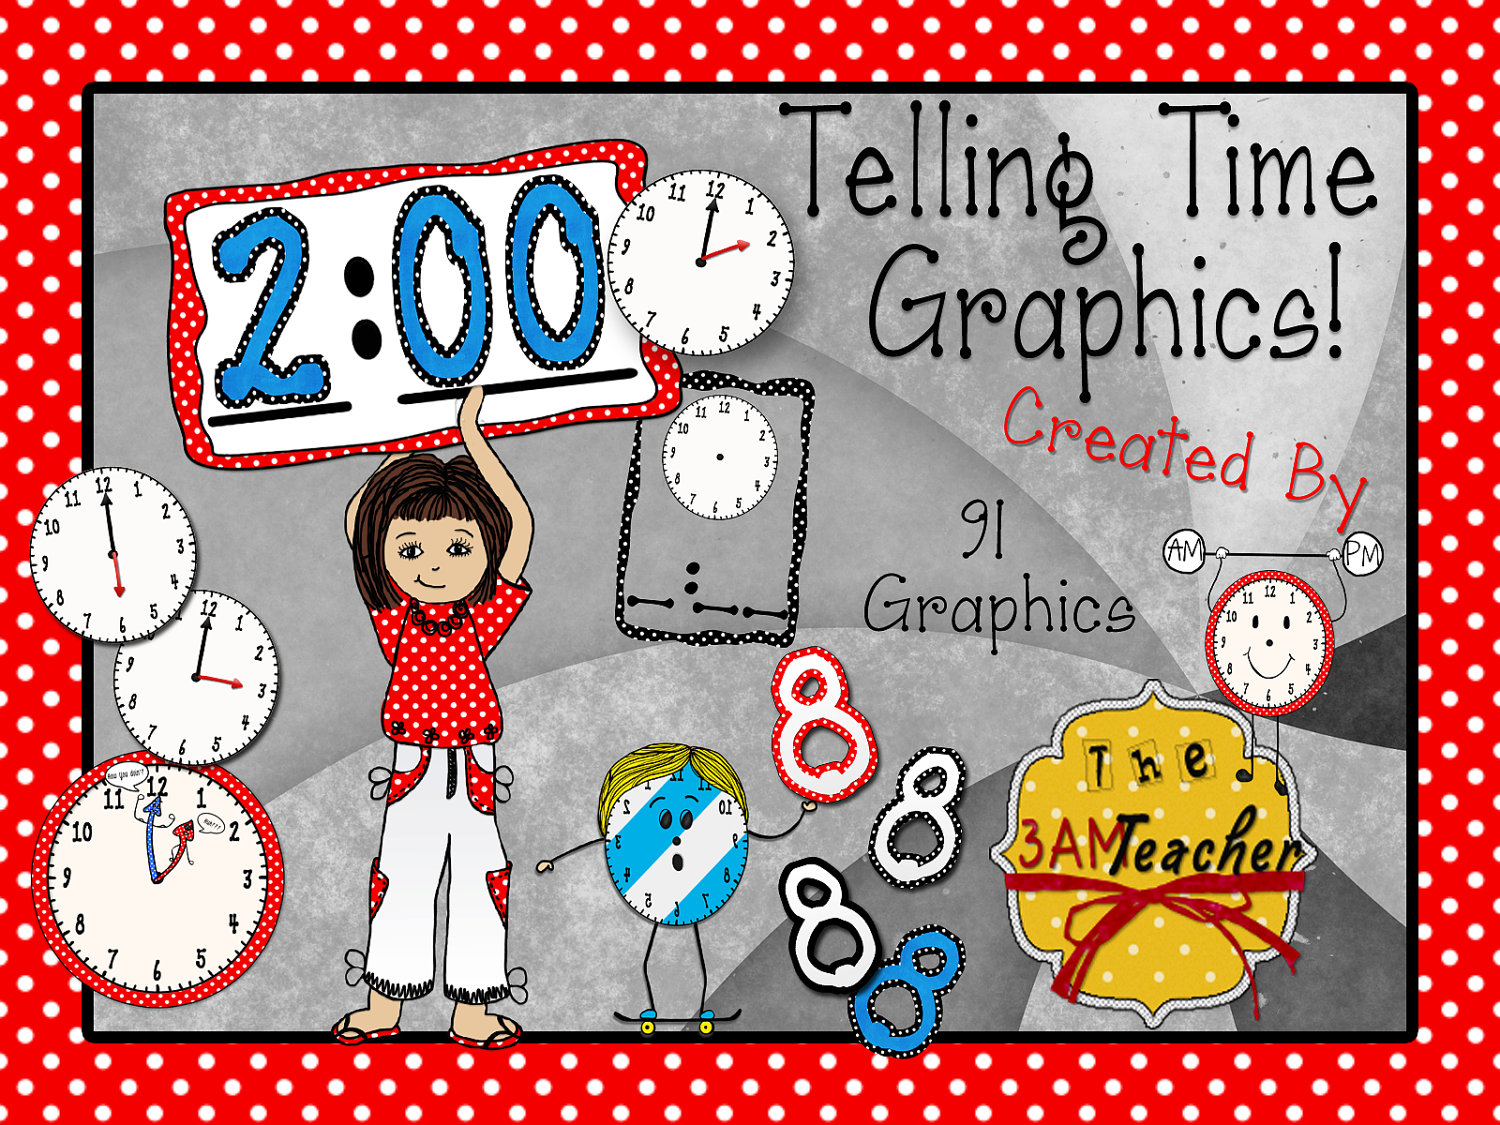 Telling Time Clip Art Collection By The3amteacher On Etsy